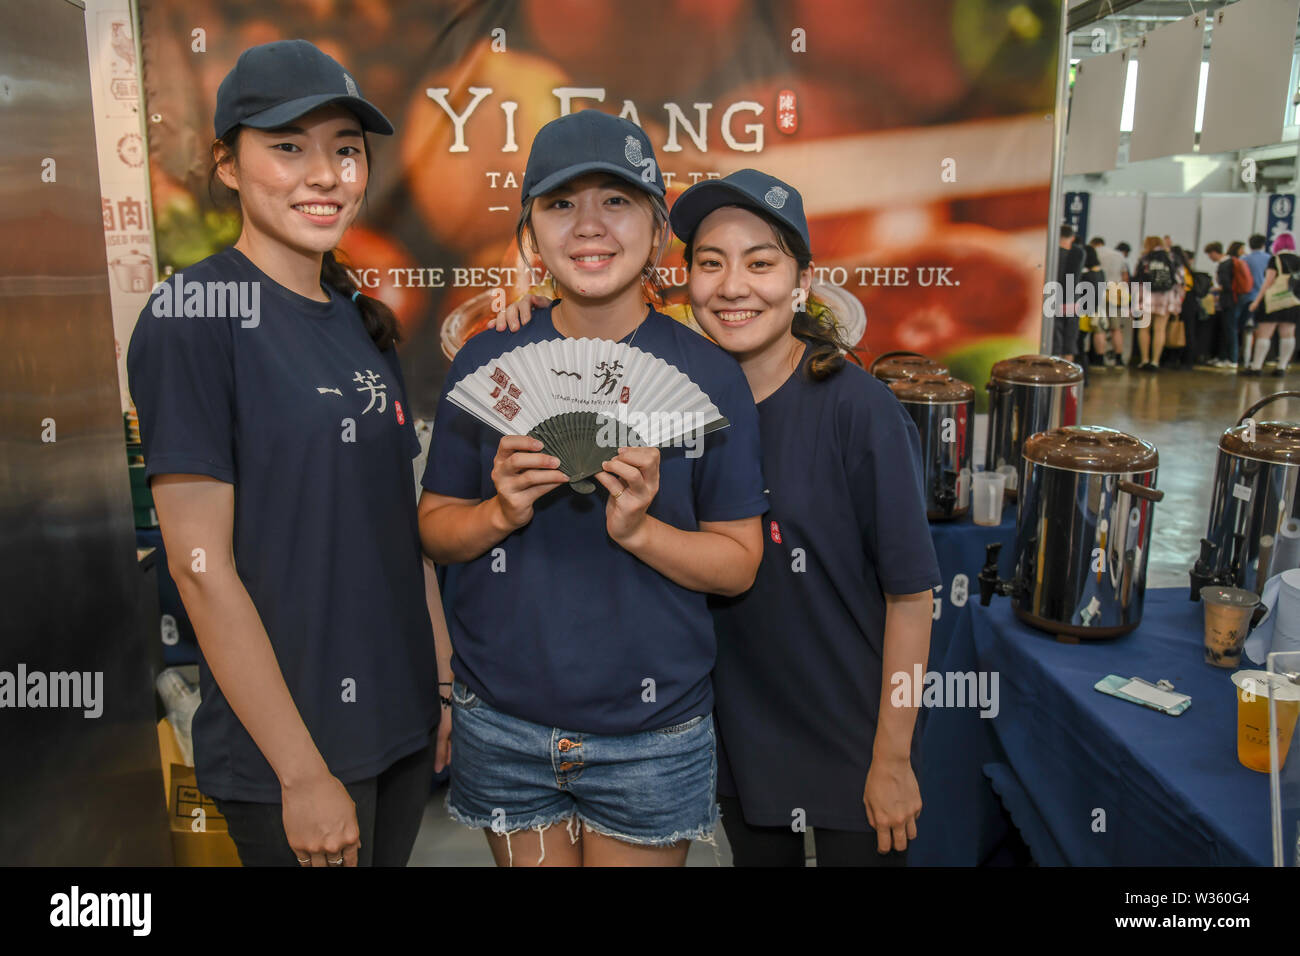 London, UK. 12th July, 2019. YiFang - Taiwan Fruit tea stall at Hyper Japan Festival 2019, on 12 July 2019, Olympia London, UK. Credit: Picture Capital/Alamy Live News Stock Photo